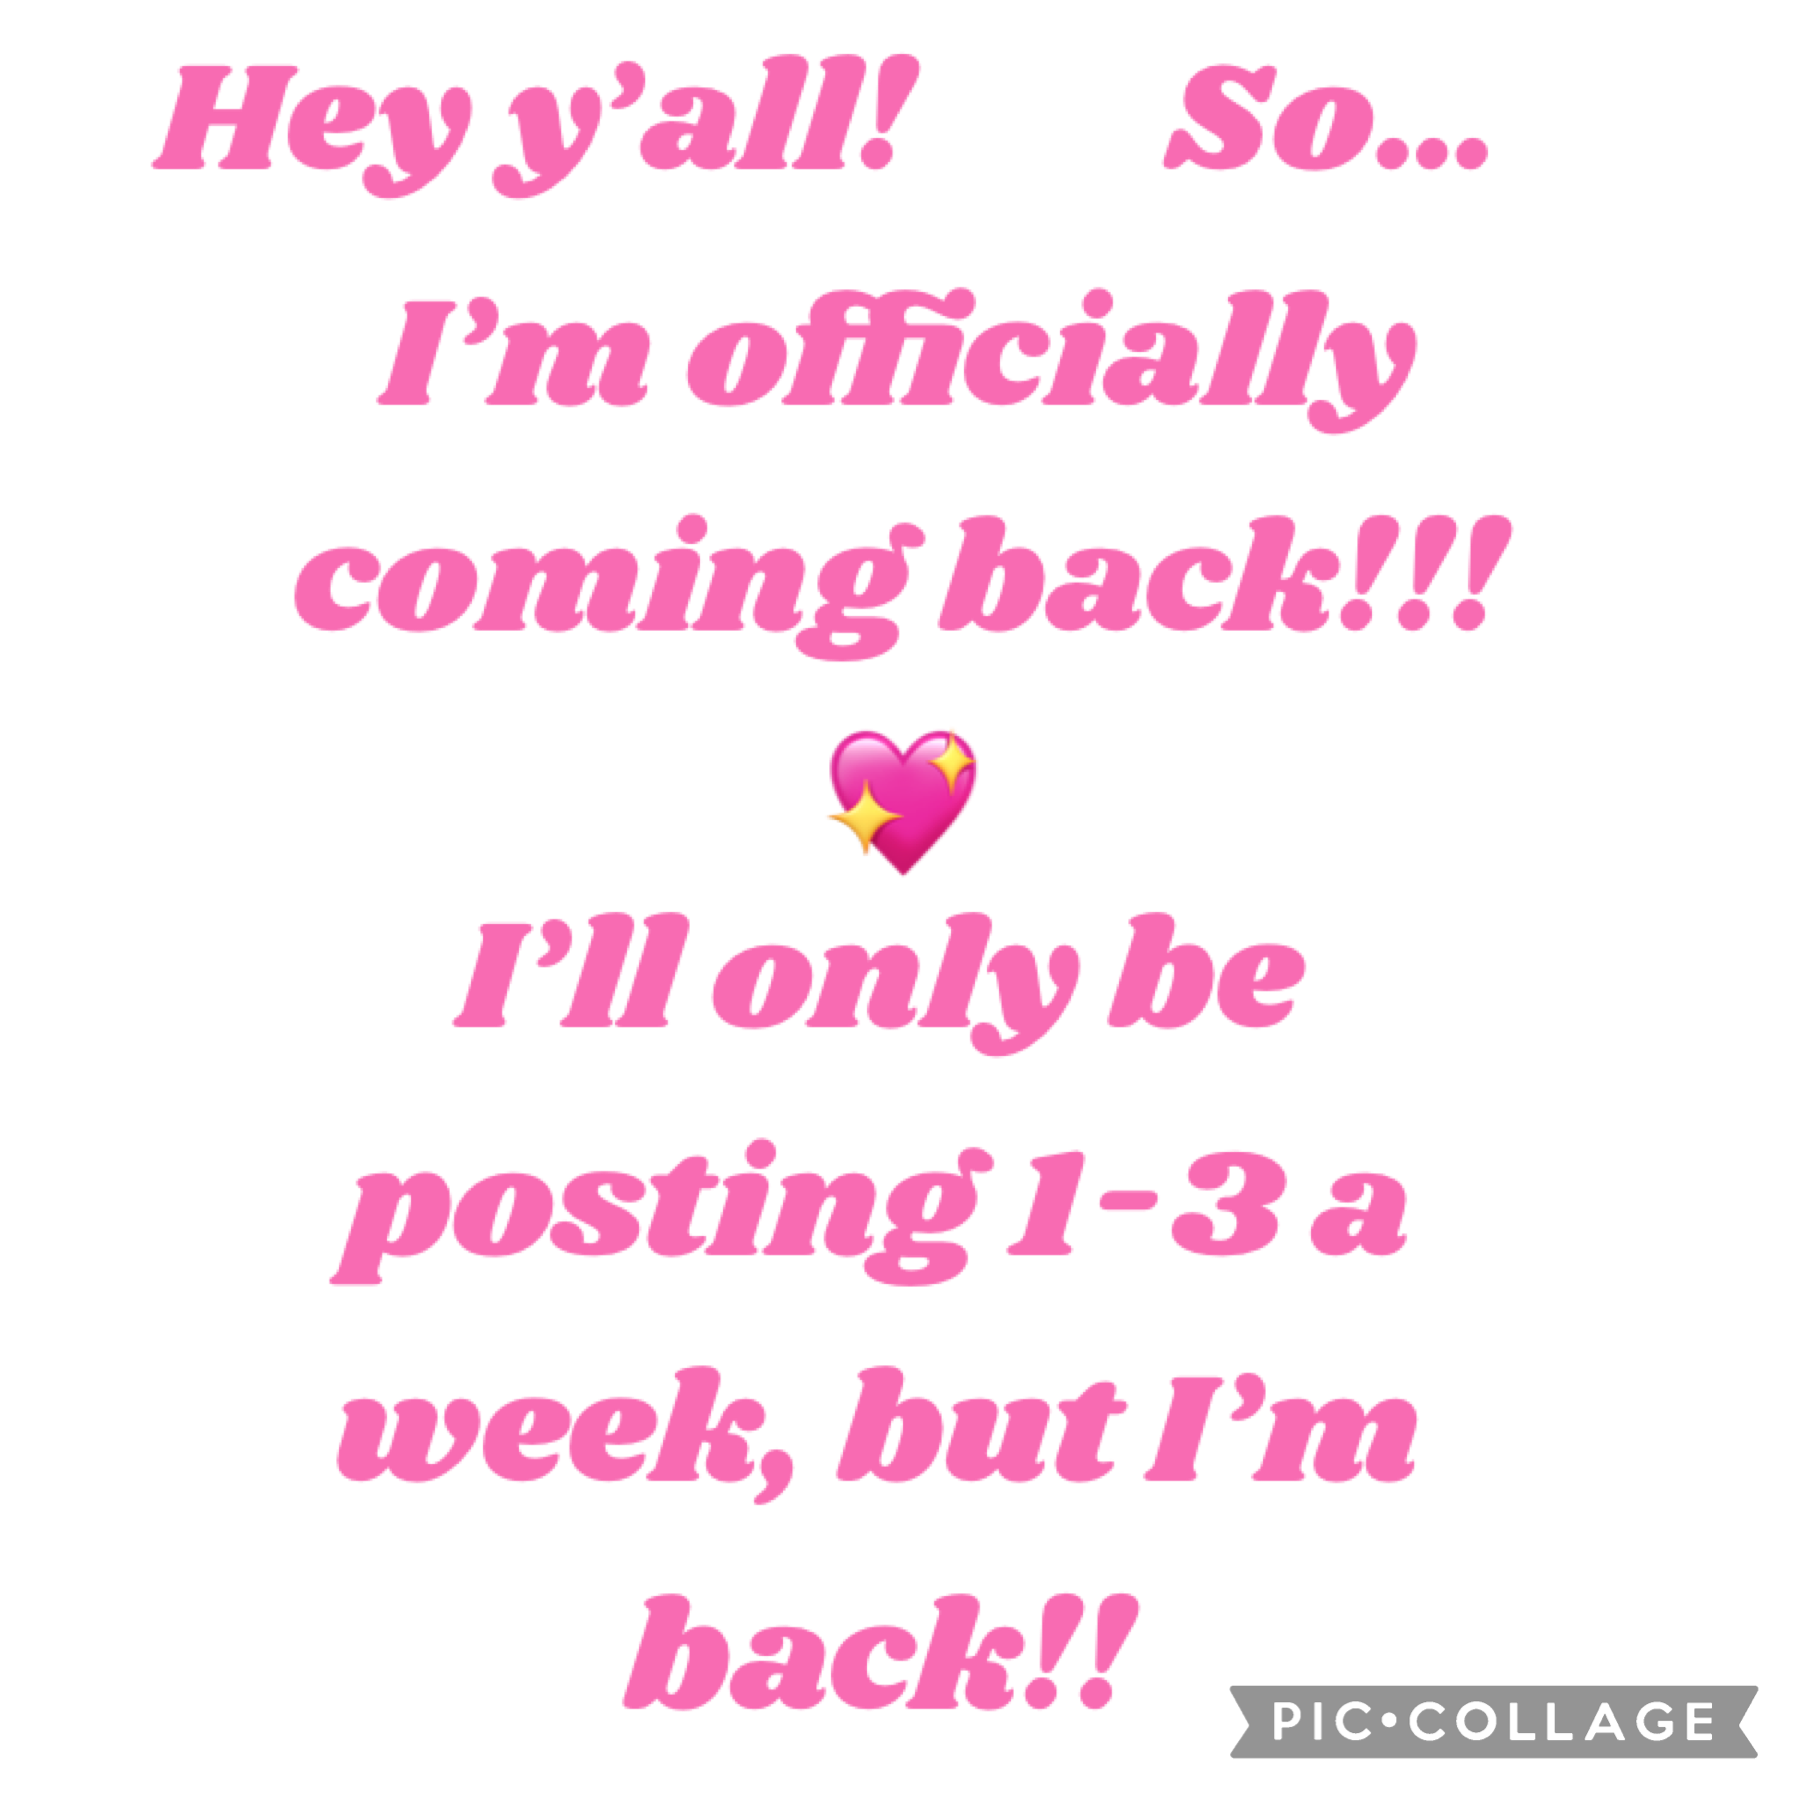 💖Tap💖
I’m so happy to be back! It’s been so long and I just needed a break but now I’m so ready! I do plan on posting tomorrow so stay updated! Stay positive!
Xoxo,
Pink-Petals